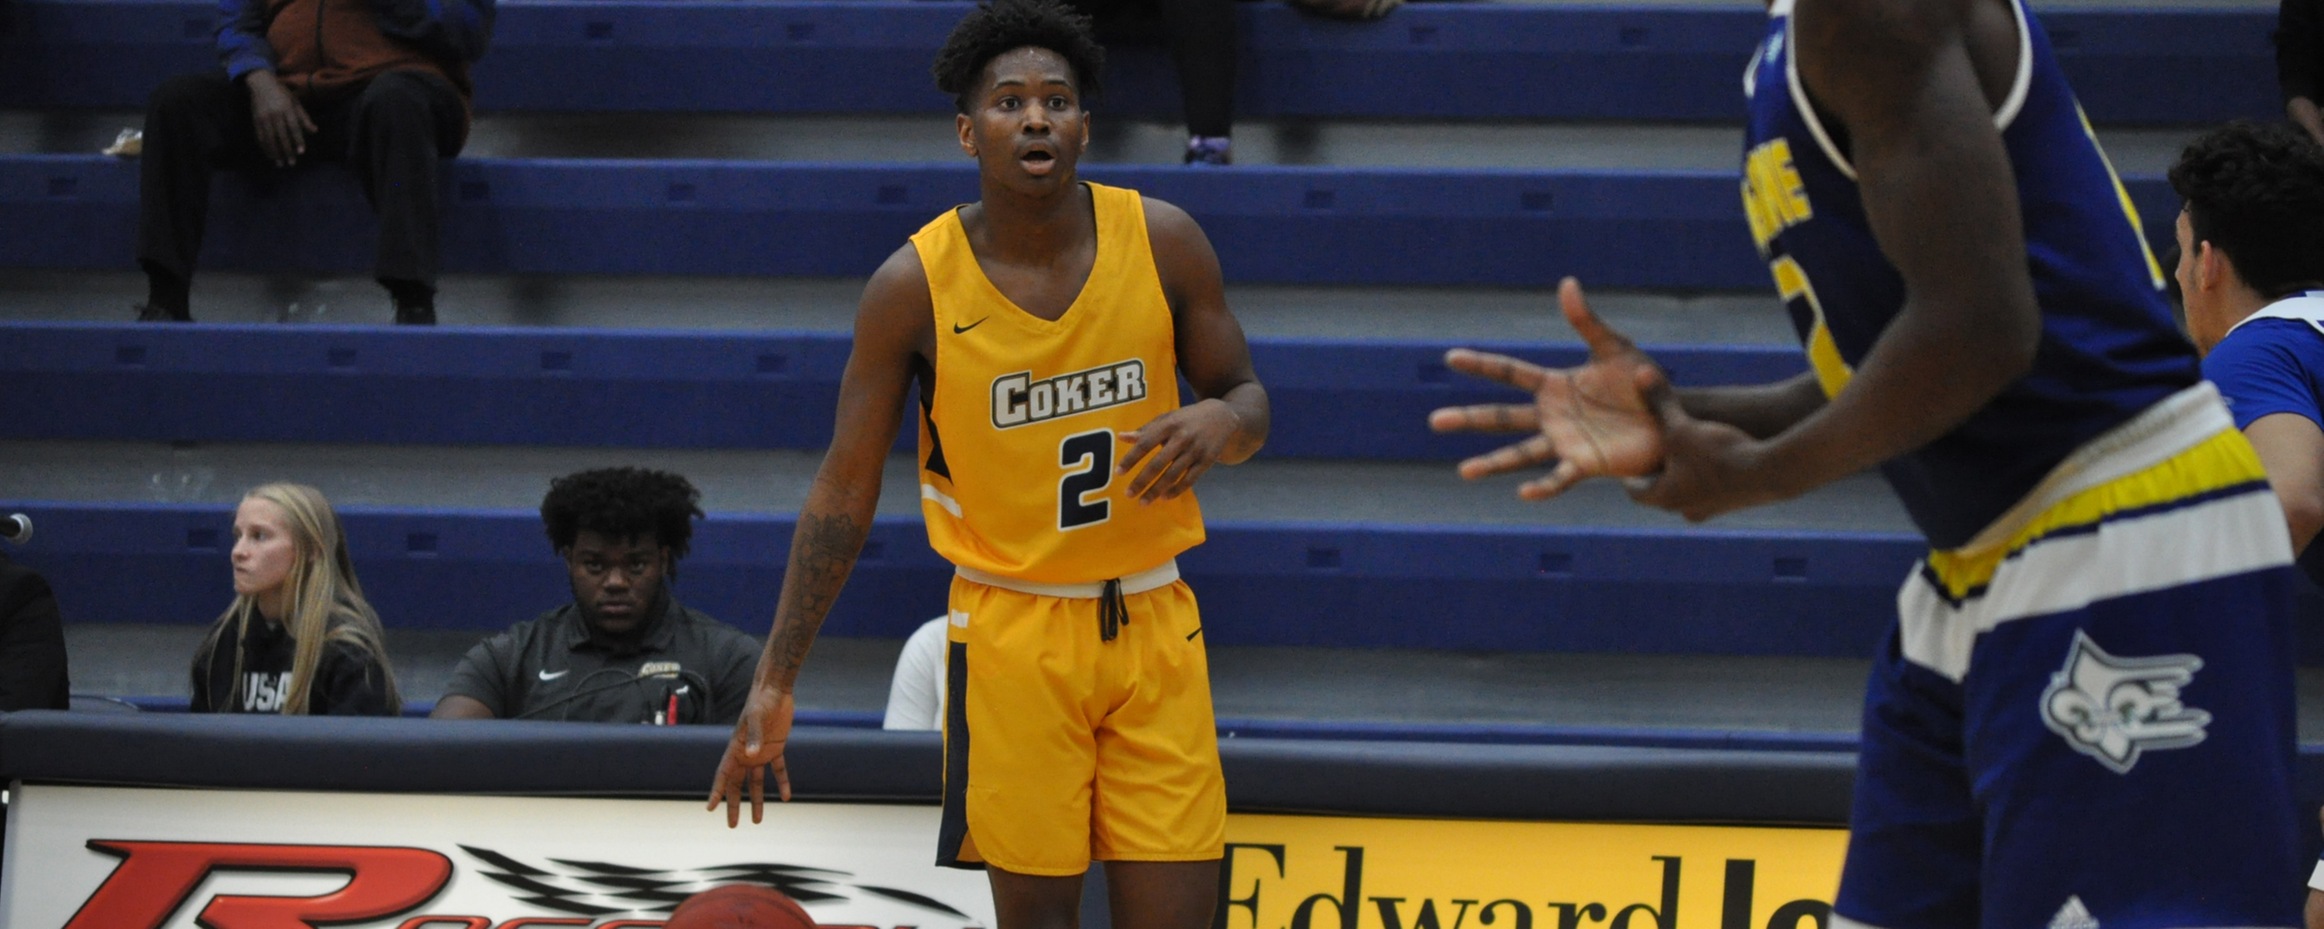 Men's Basketball Falls to Anderson (S.C.) in Conference Play Wednesday Night